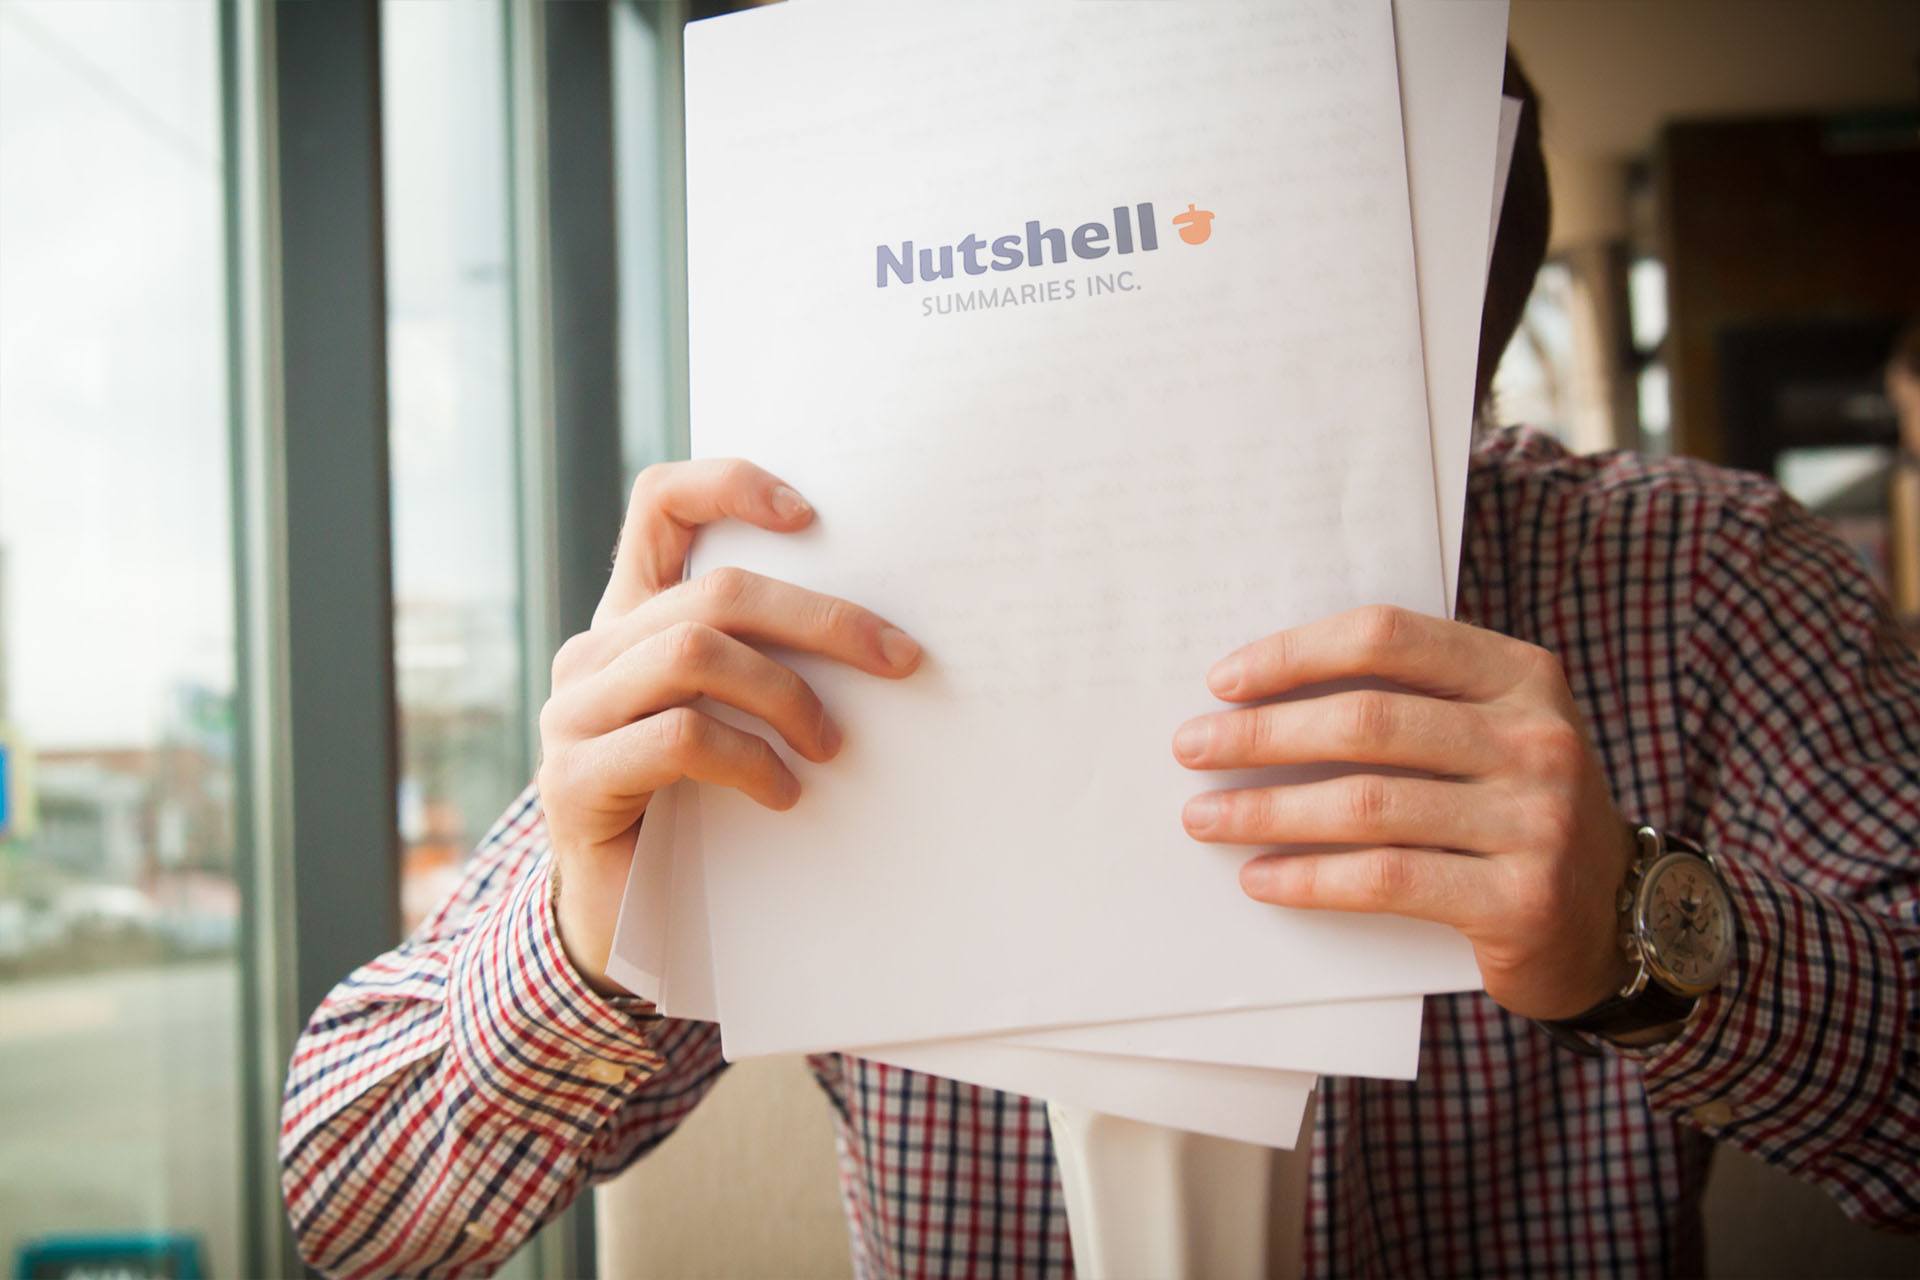 young office worker holding paperwork up to forehead with nutshell summaries logo on rear of paperwork